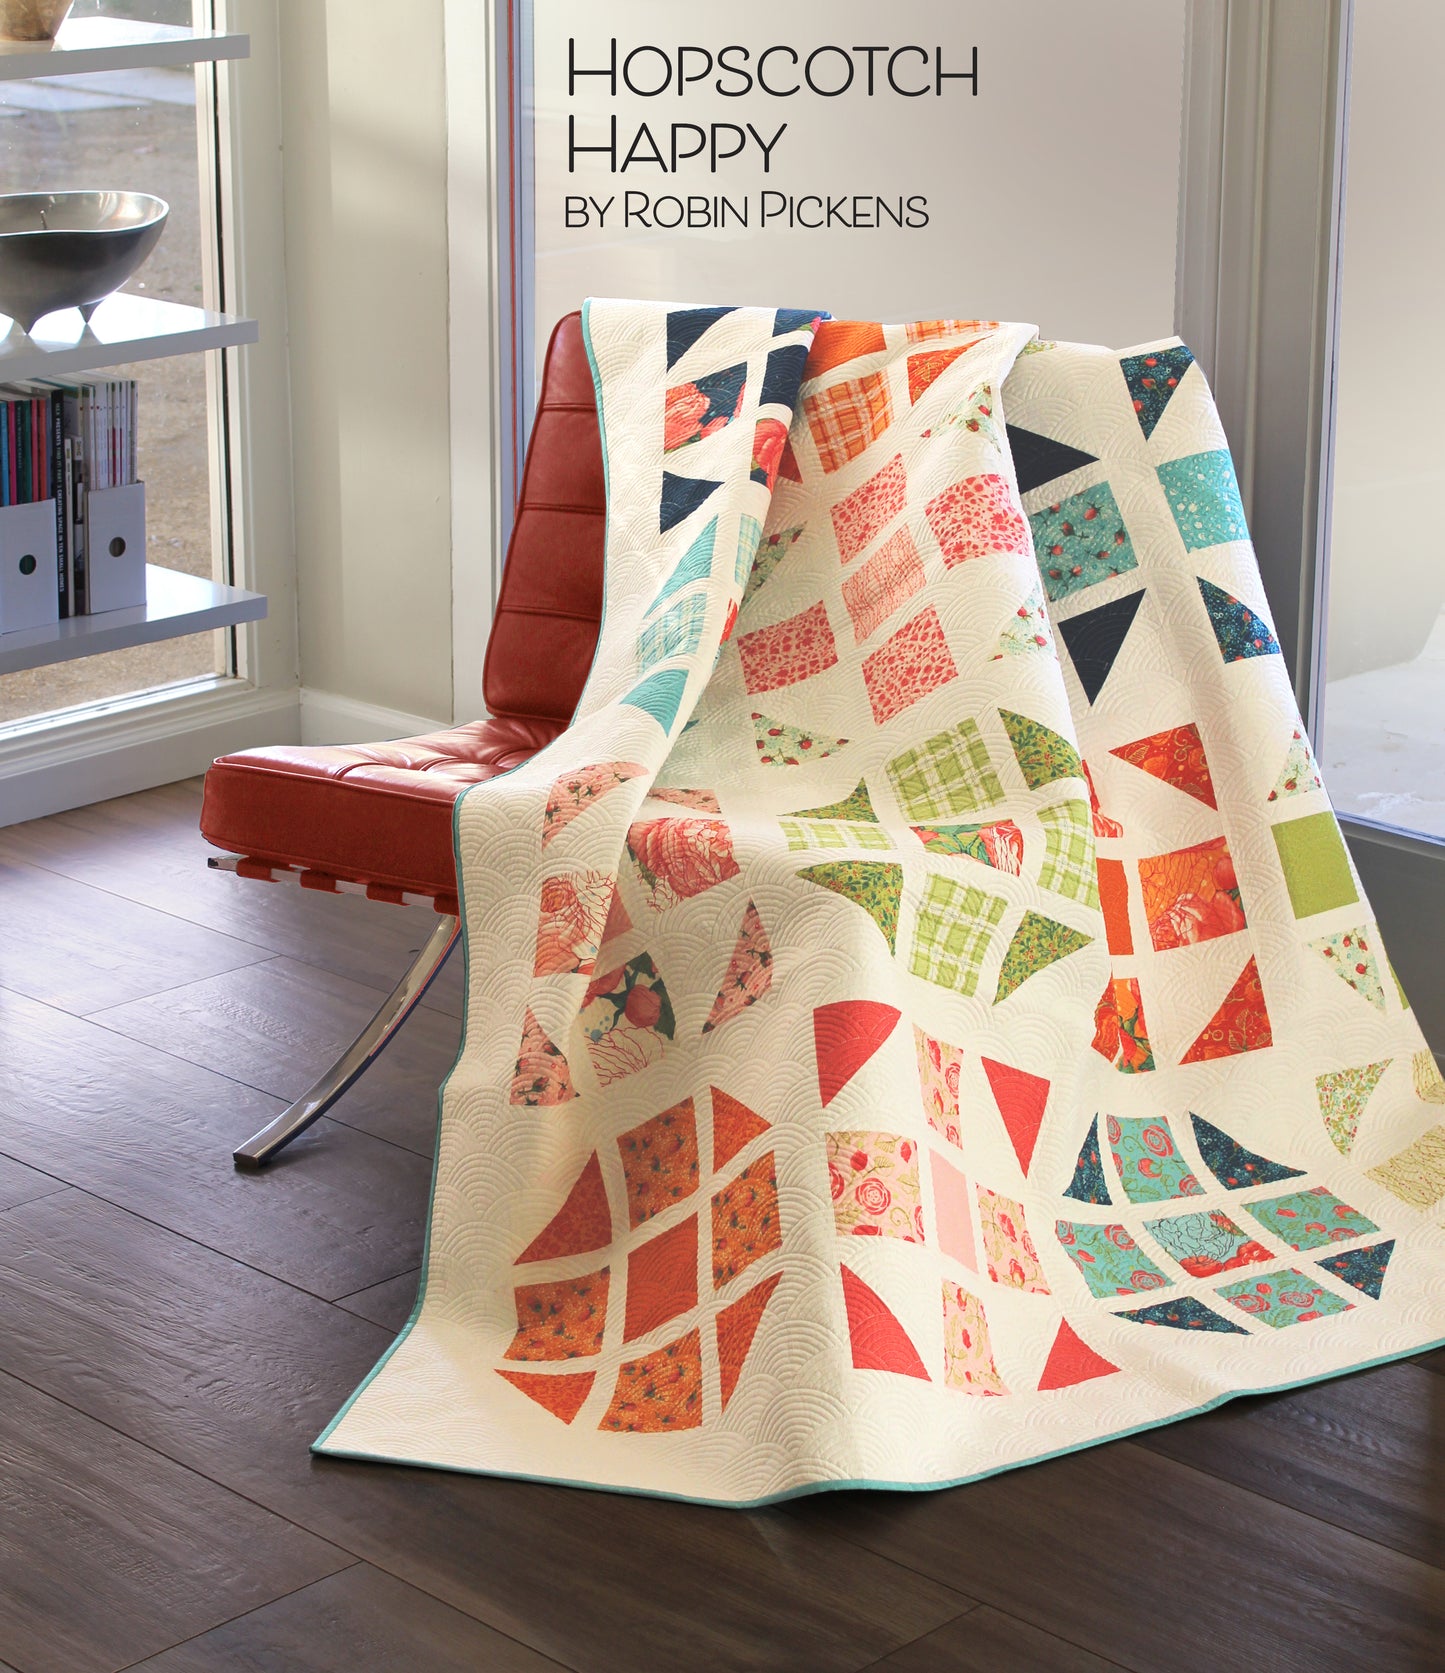 HOPSCOTCH HAPPY Quilt Pattern (printed booklet) by Robin Pickens /King, Queen, Twin, Lap